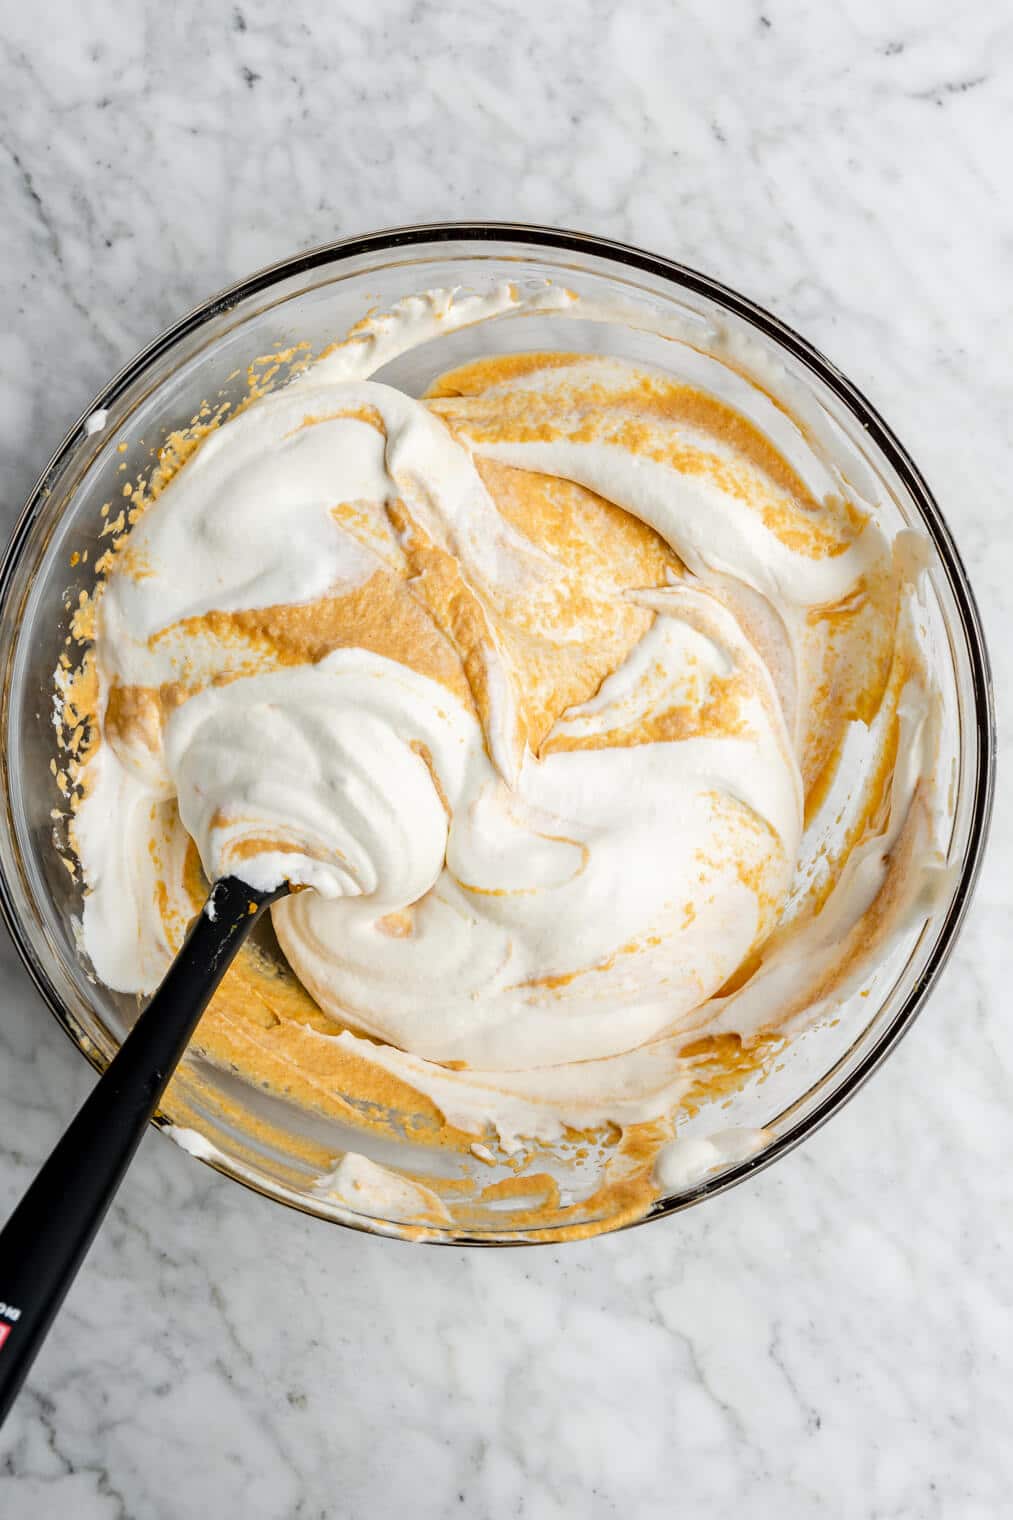 Pumpkin mousse ingredients being folded in with whipped cream in a glass mixing bowl with a black spatula.